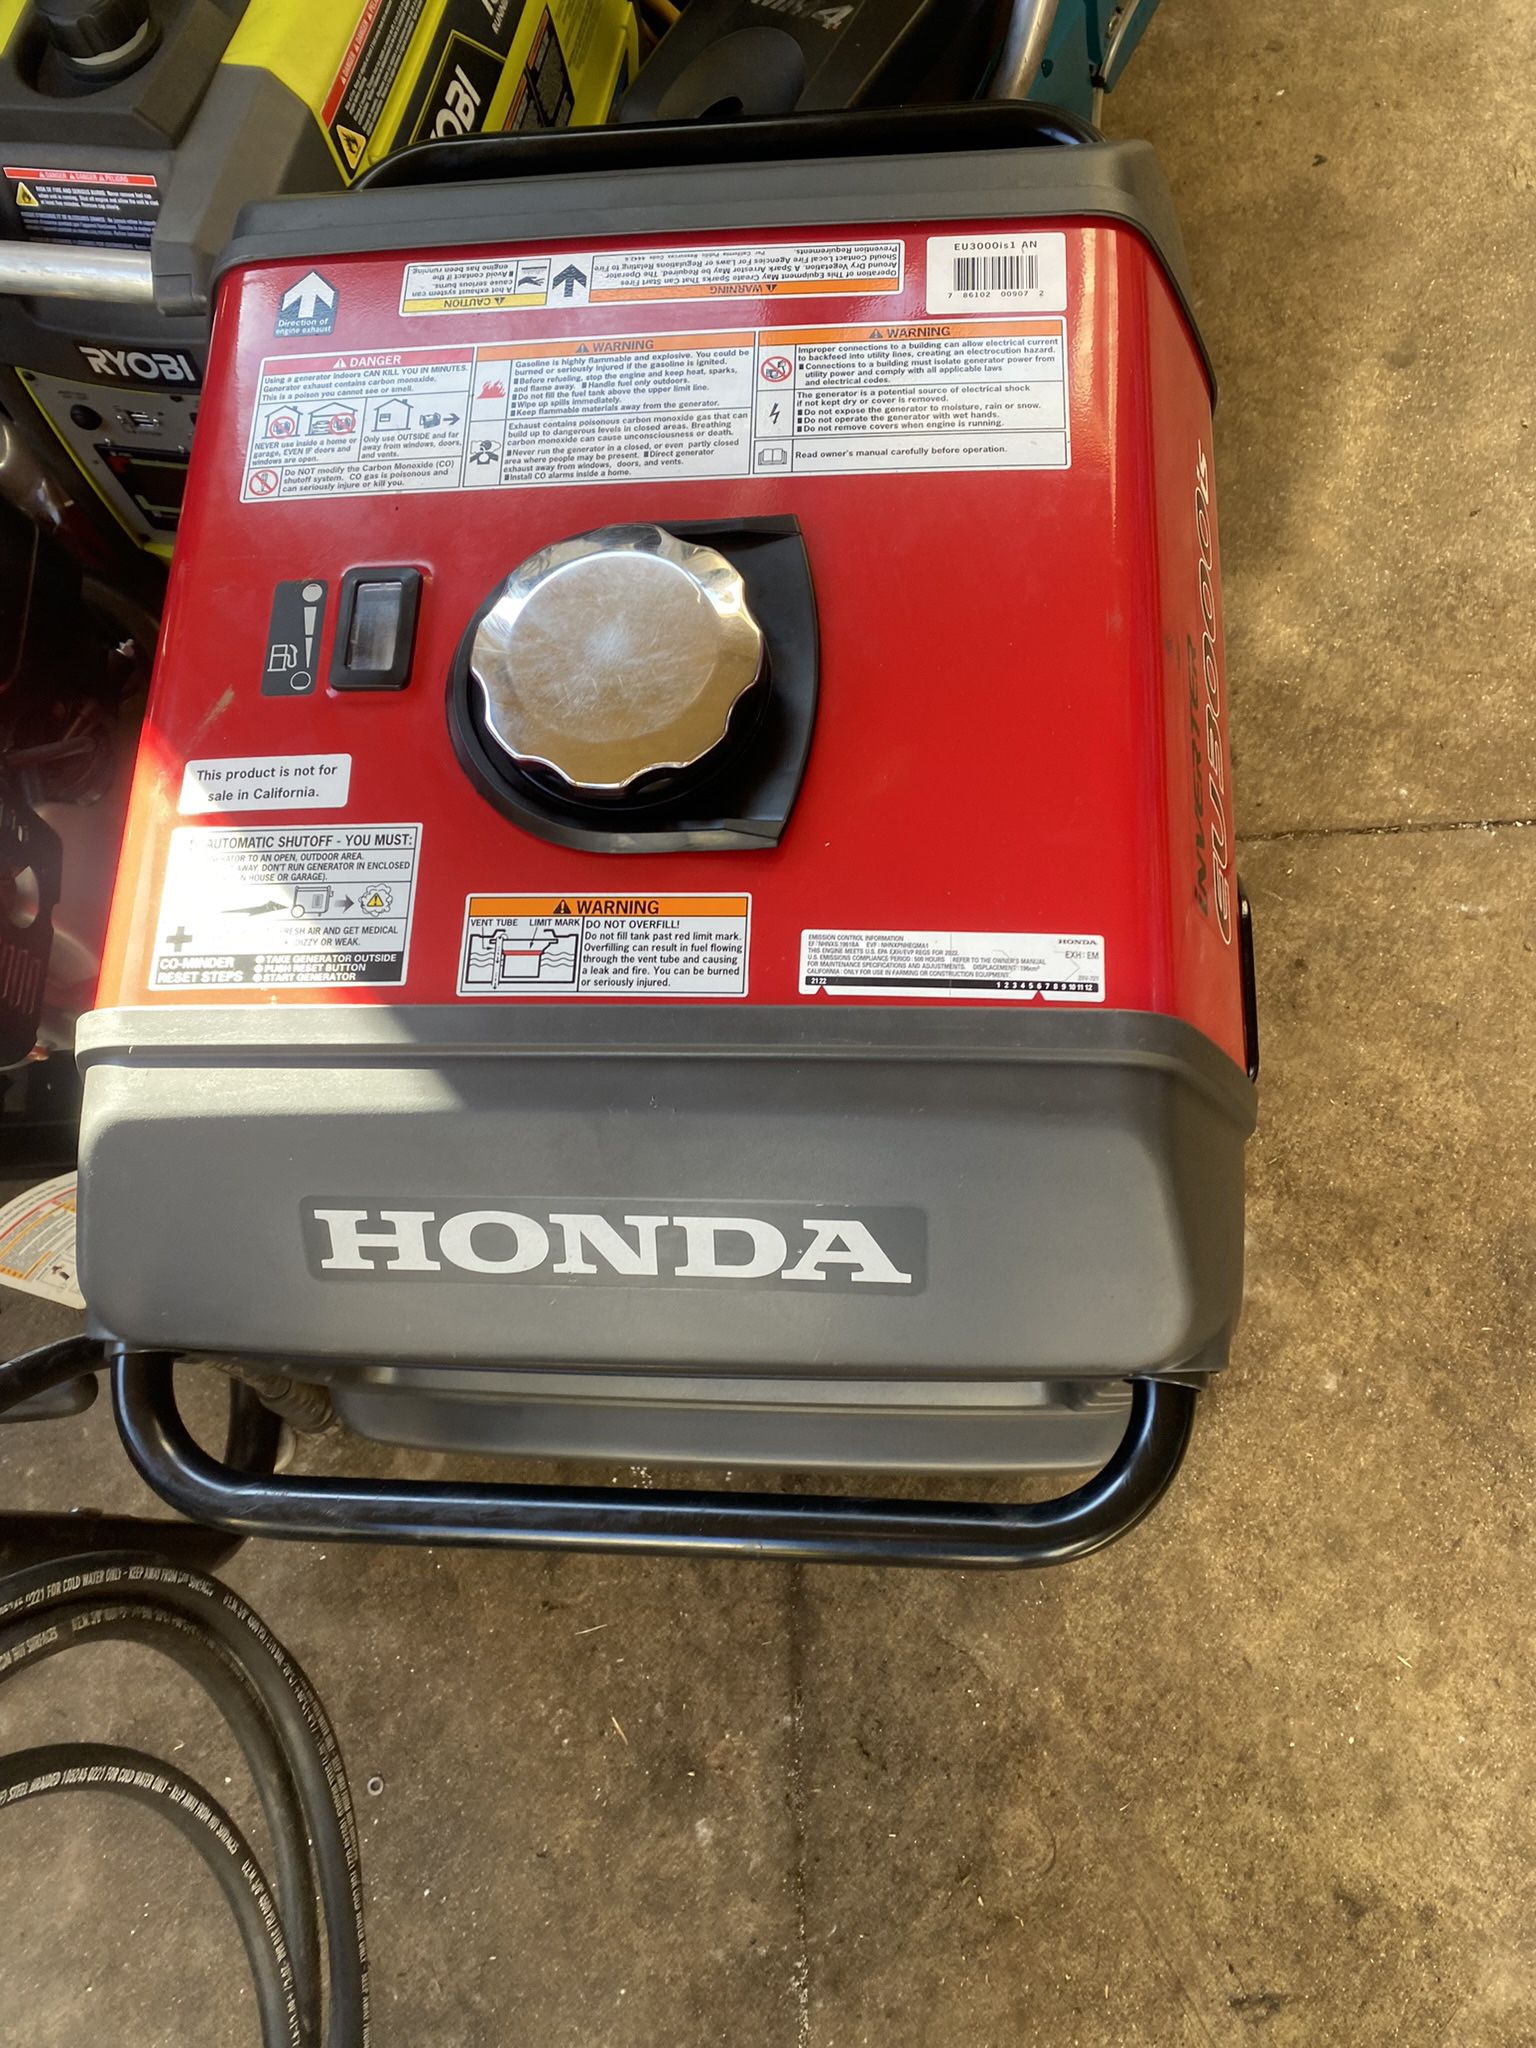 Honda 3000-Watt Super Quiet Electric and Recoil Start Gasoline Powered Inverter Generator with 30 Amp Outlet